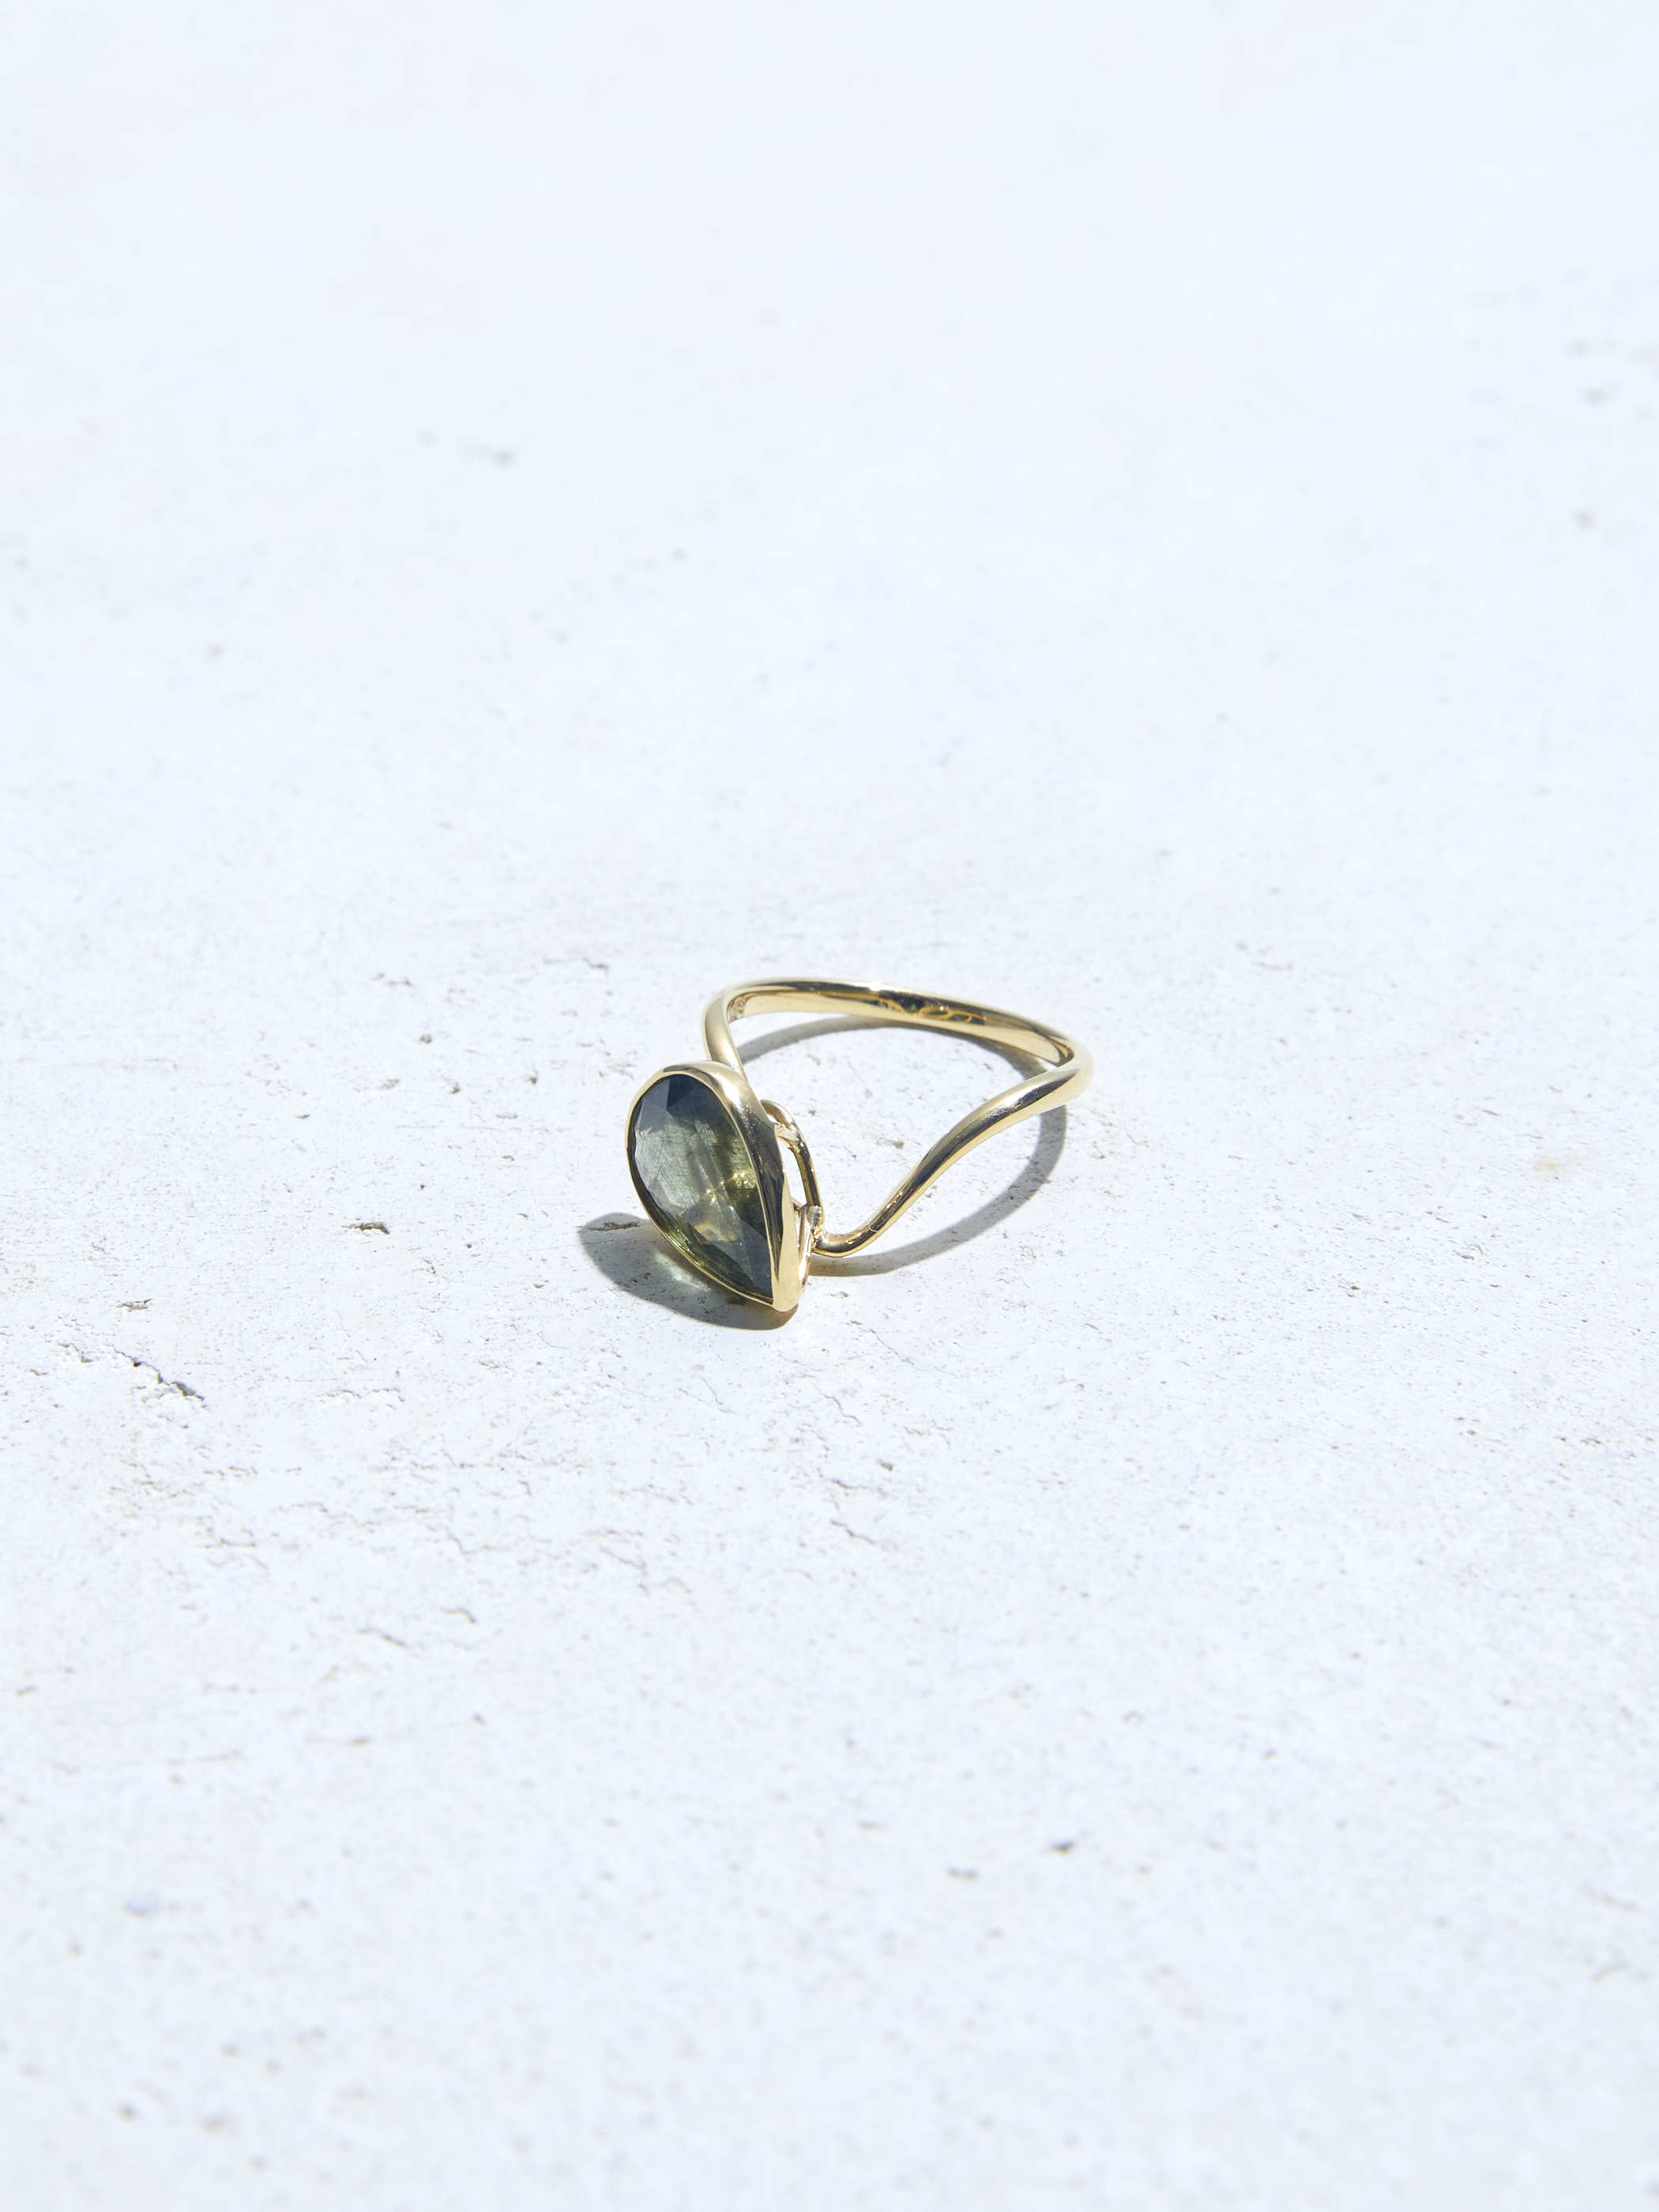 【SOLD OUT】RUTILED PERIDOT RING